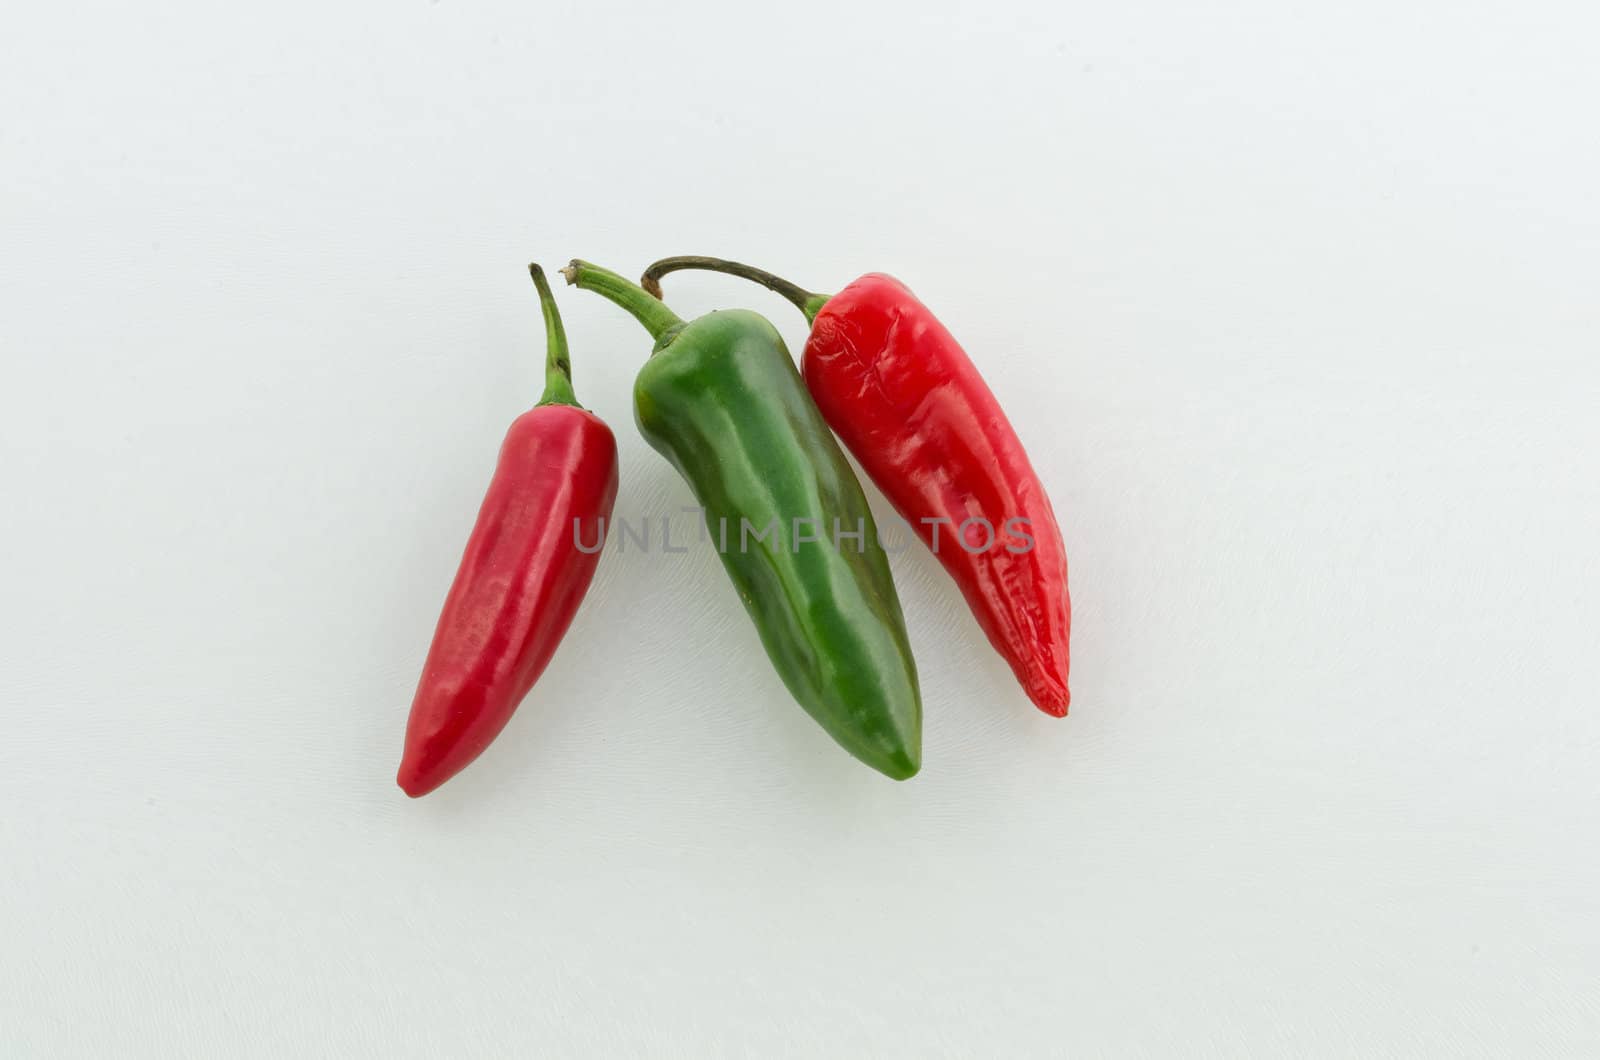 Chilli peppers by Jez22